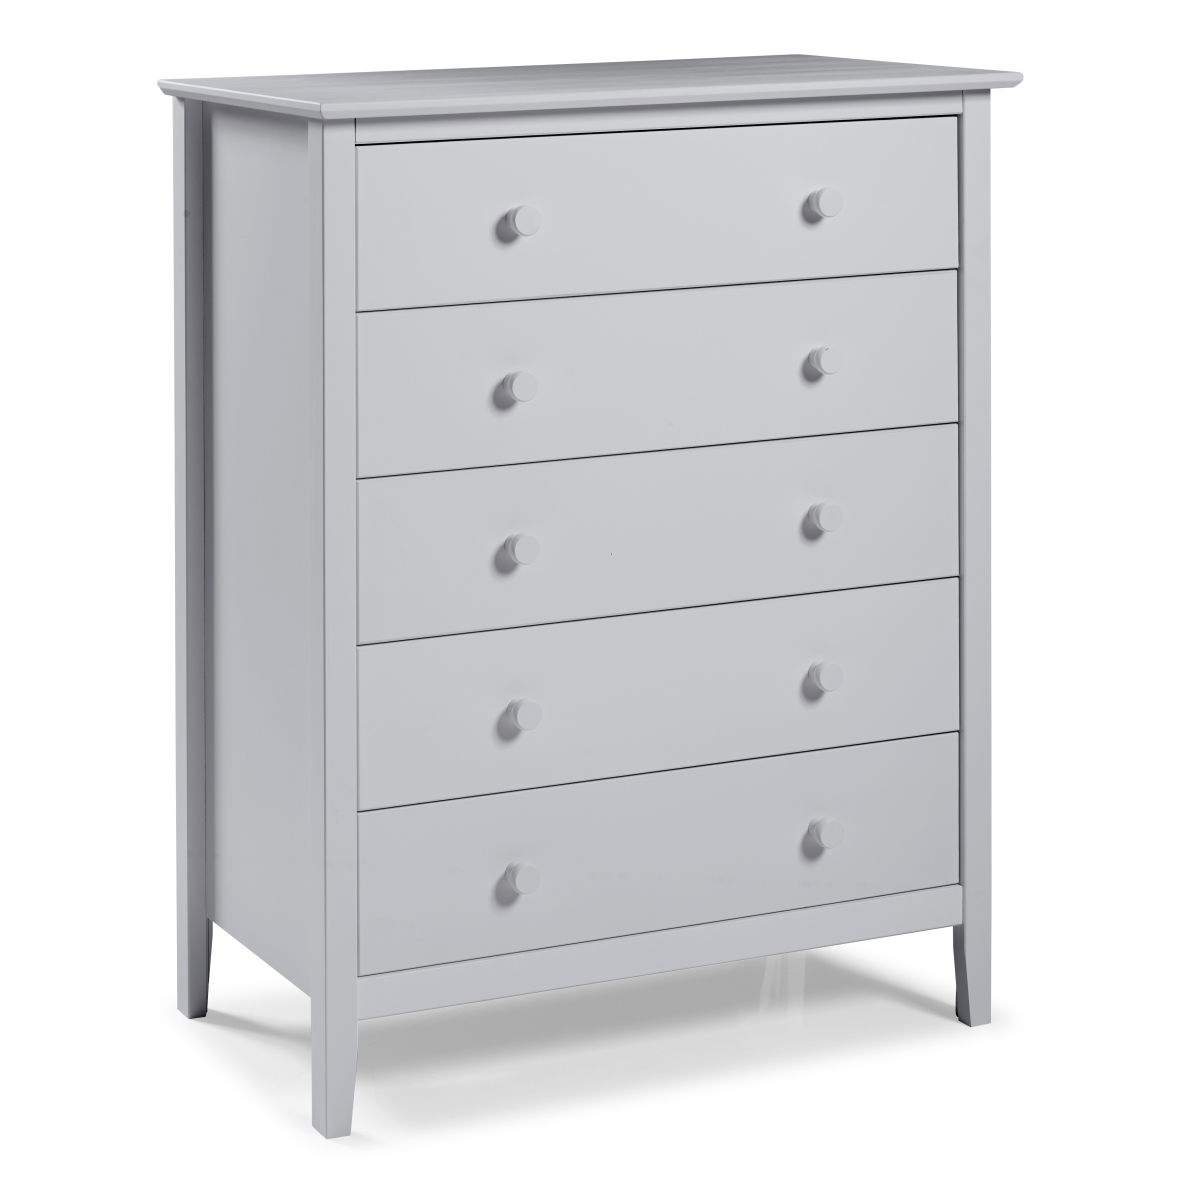 Picture of Alaterre AJSP0280 Simplicity Wood 5-Drawer Chest, Dove Gray